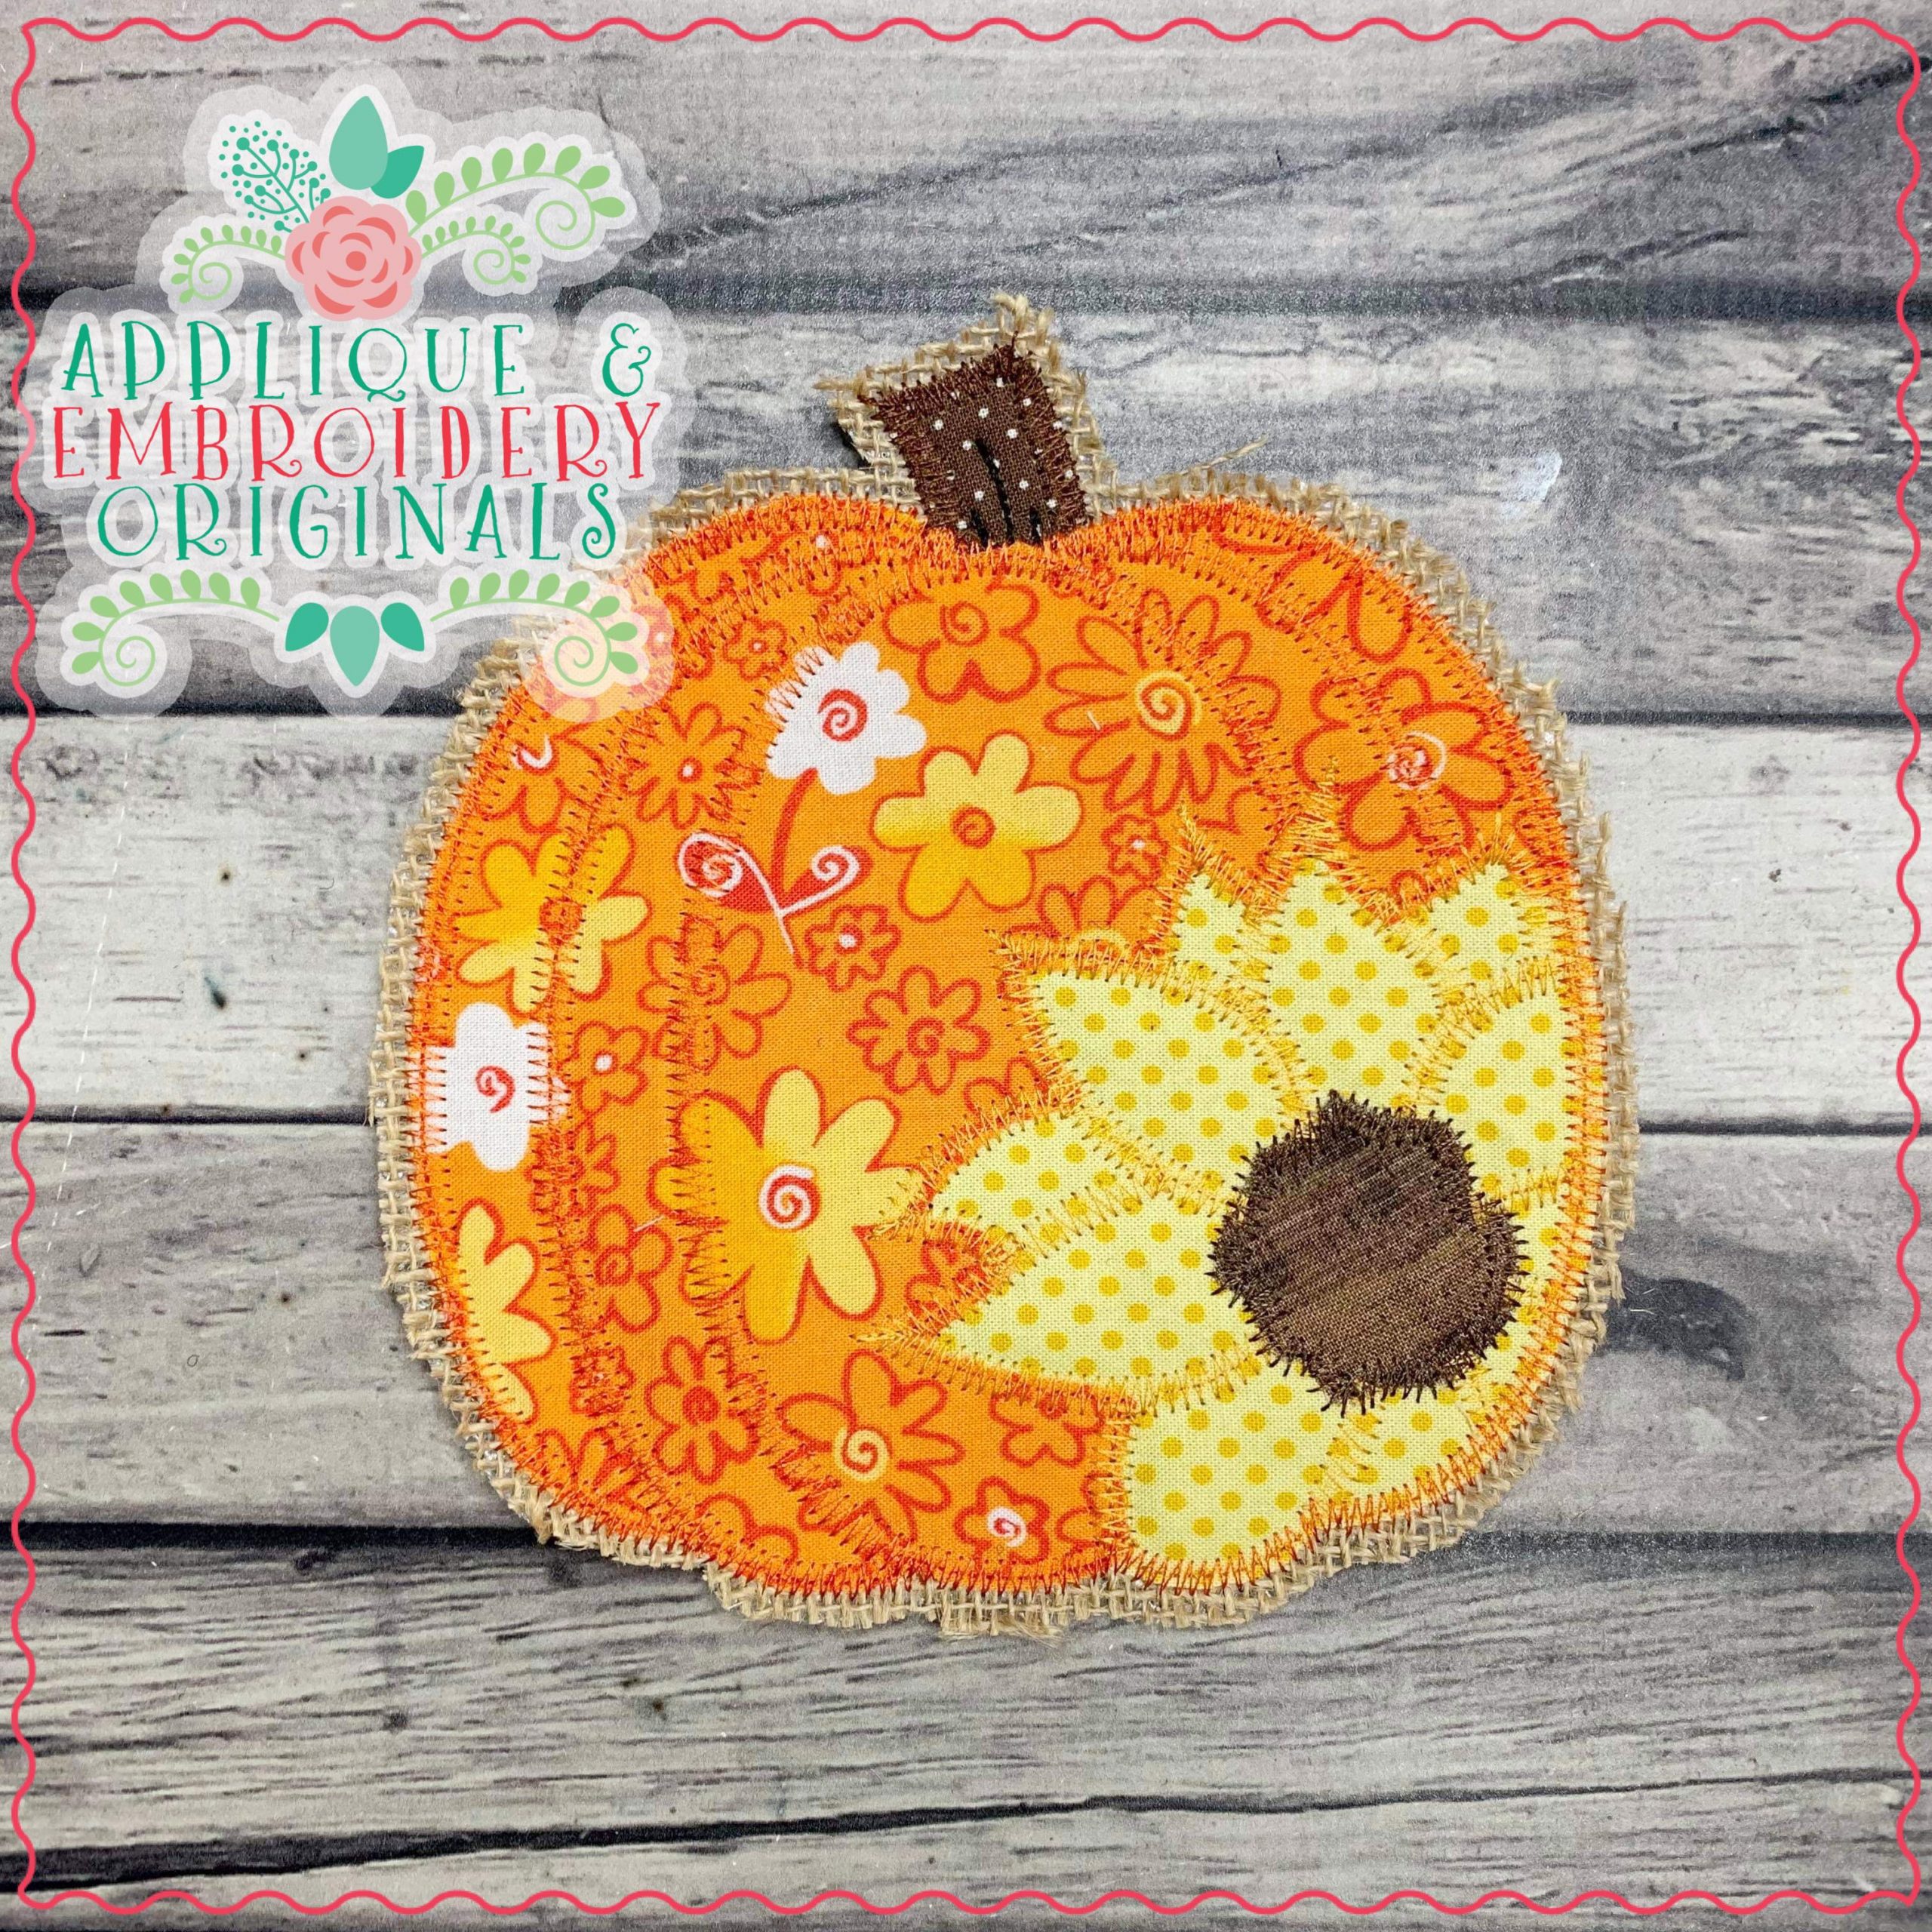 6 Pumpkin & Floral Stamped Design Embroidery Kit by Loops & Threads®